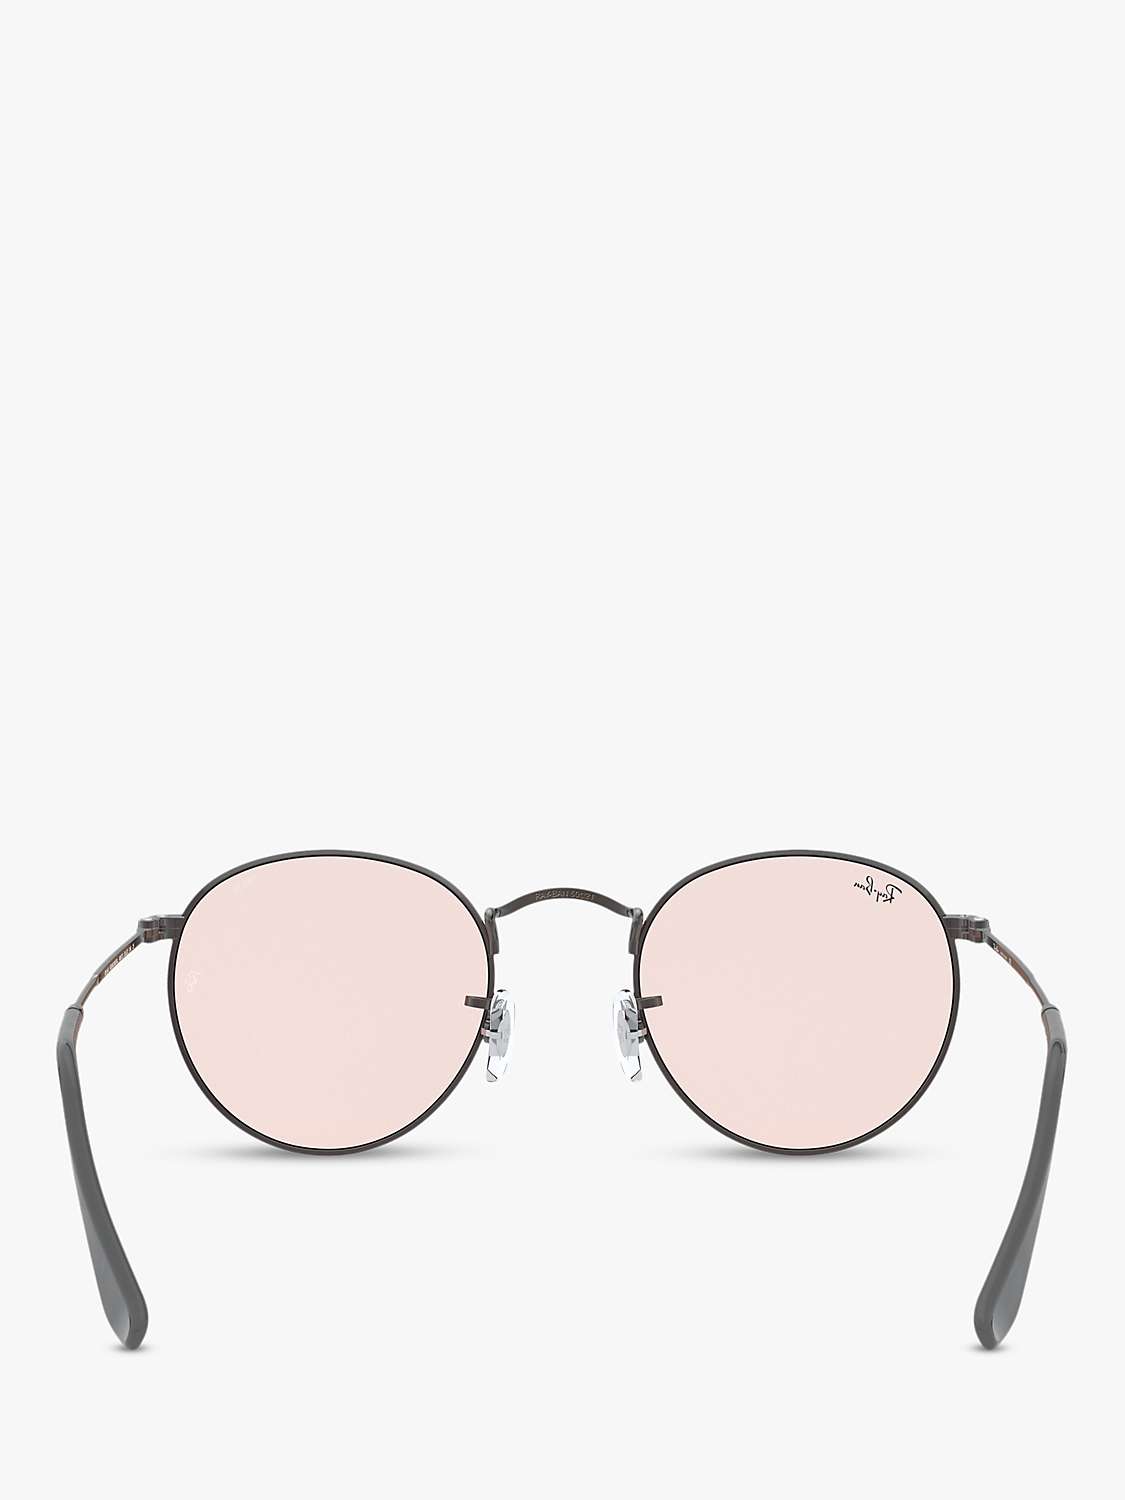 Buy Ray-Ban RB3447 Men's Round Metal Sunglasses Online at johnlewis.com